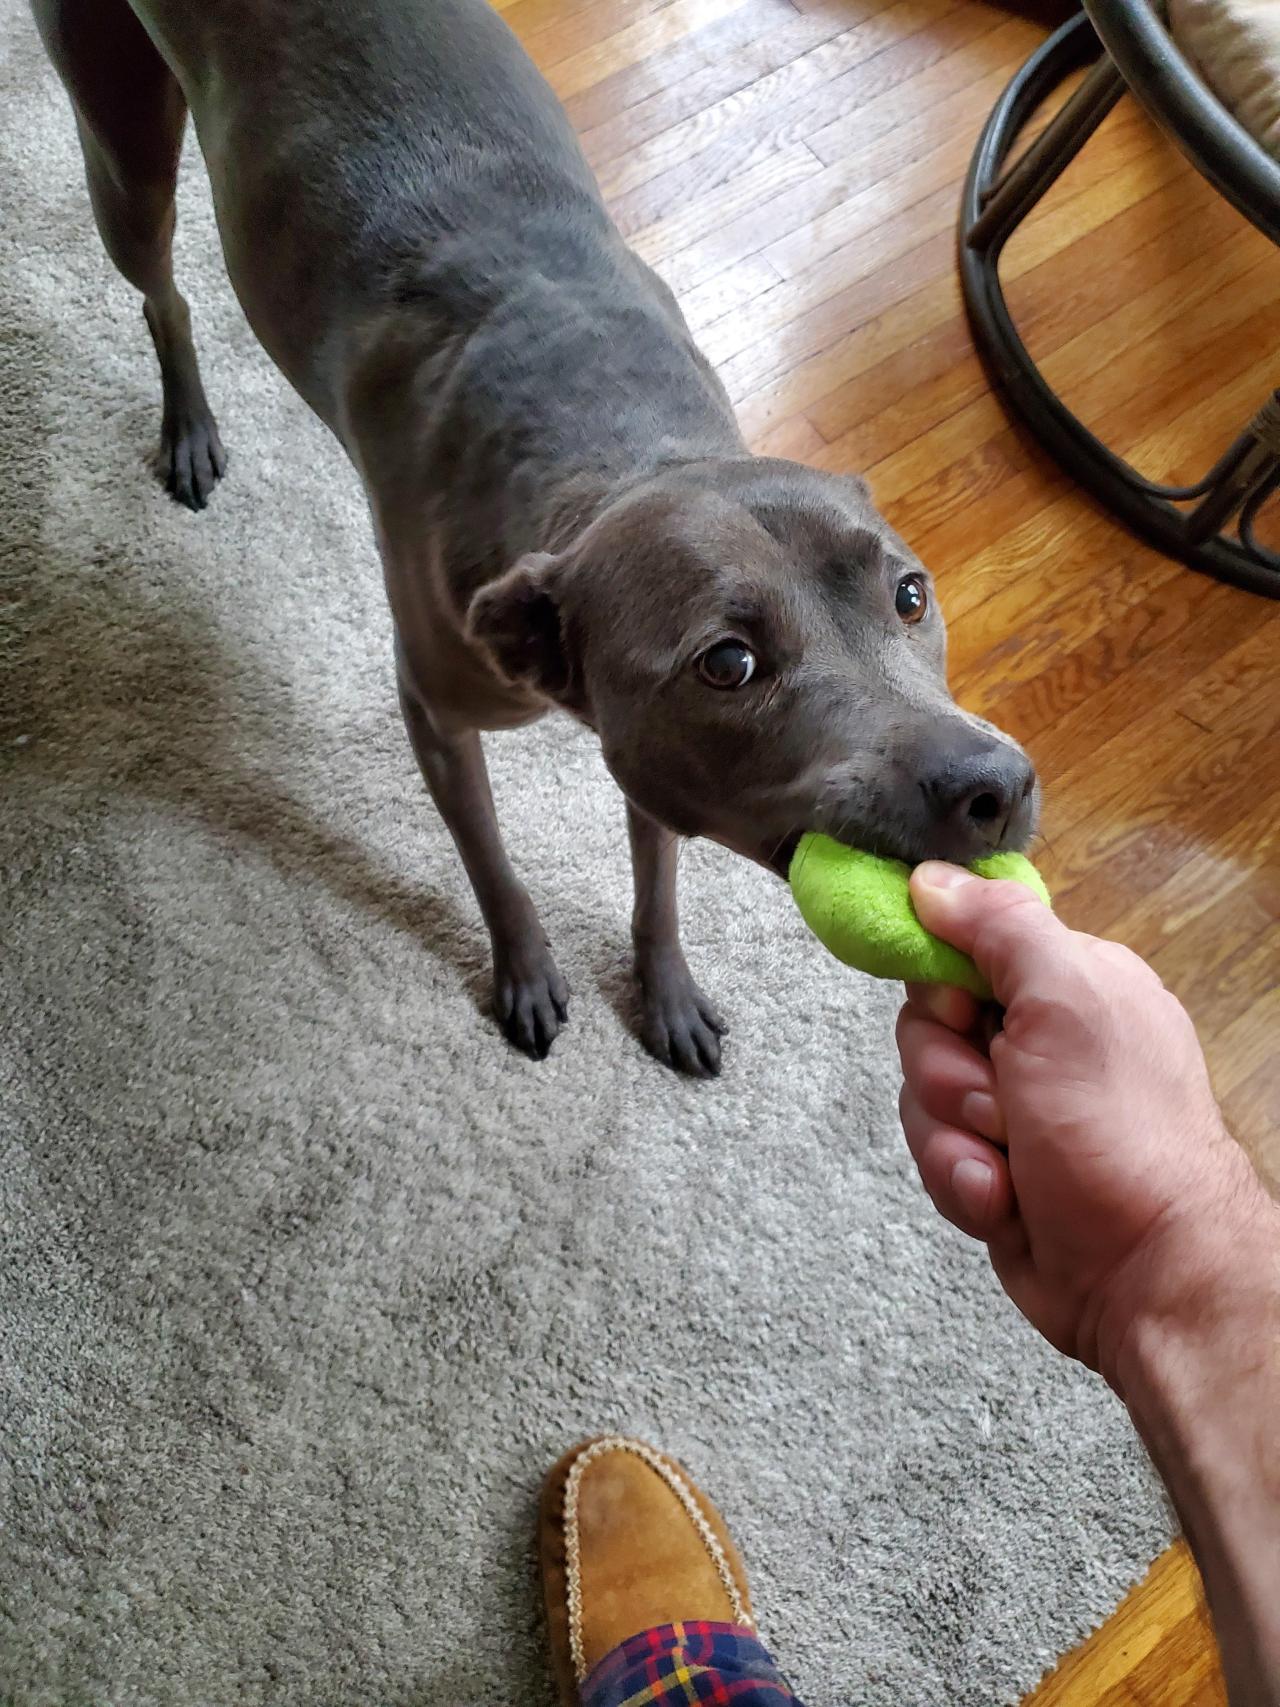 My girls favorite tug toy, her pea. #pitbull#aww#cets#pupperss